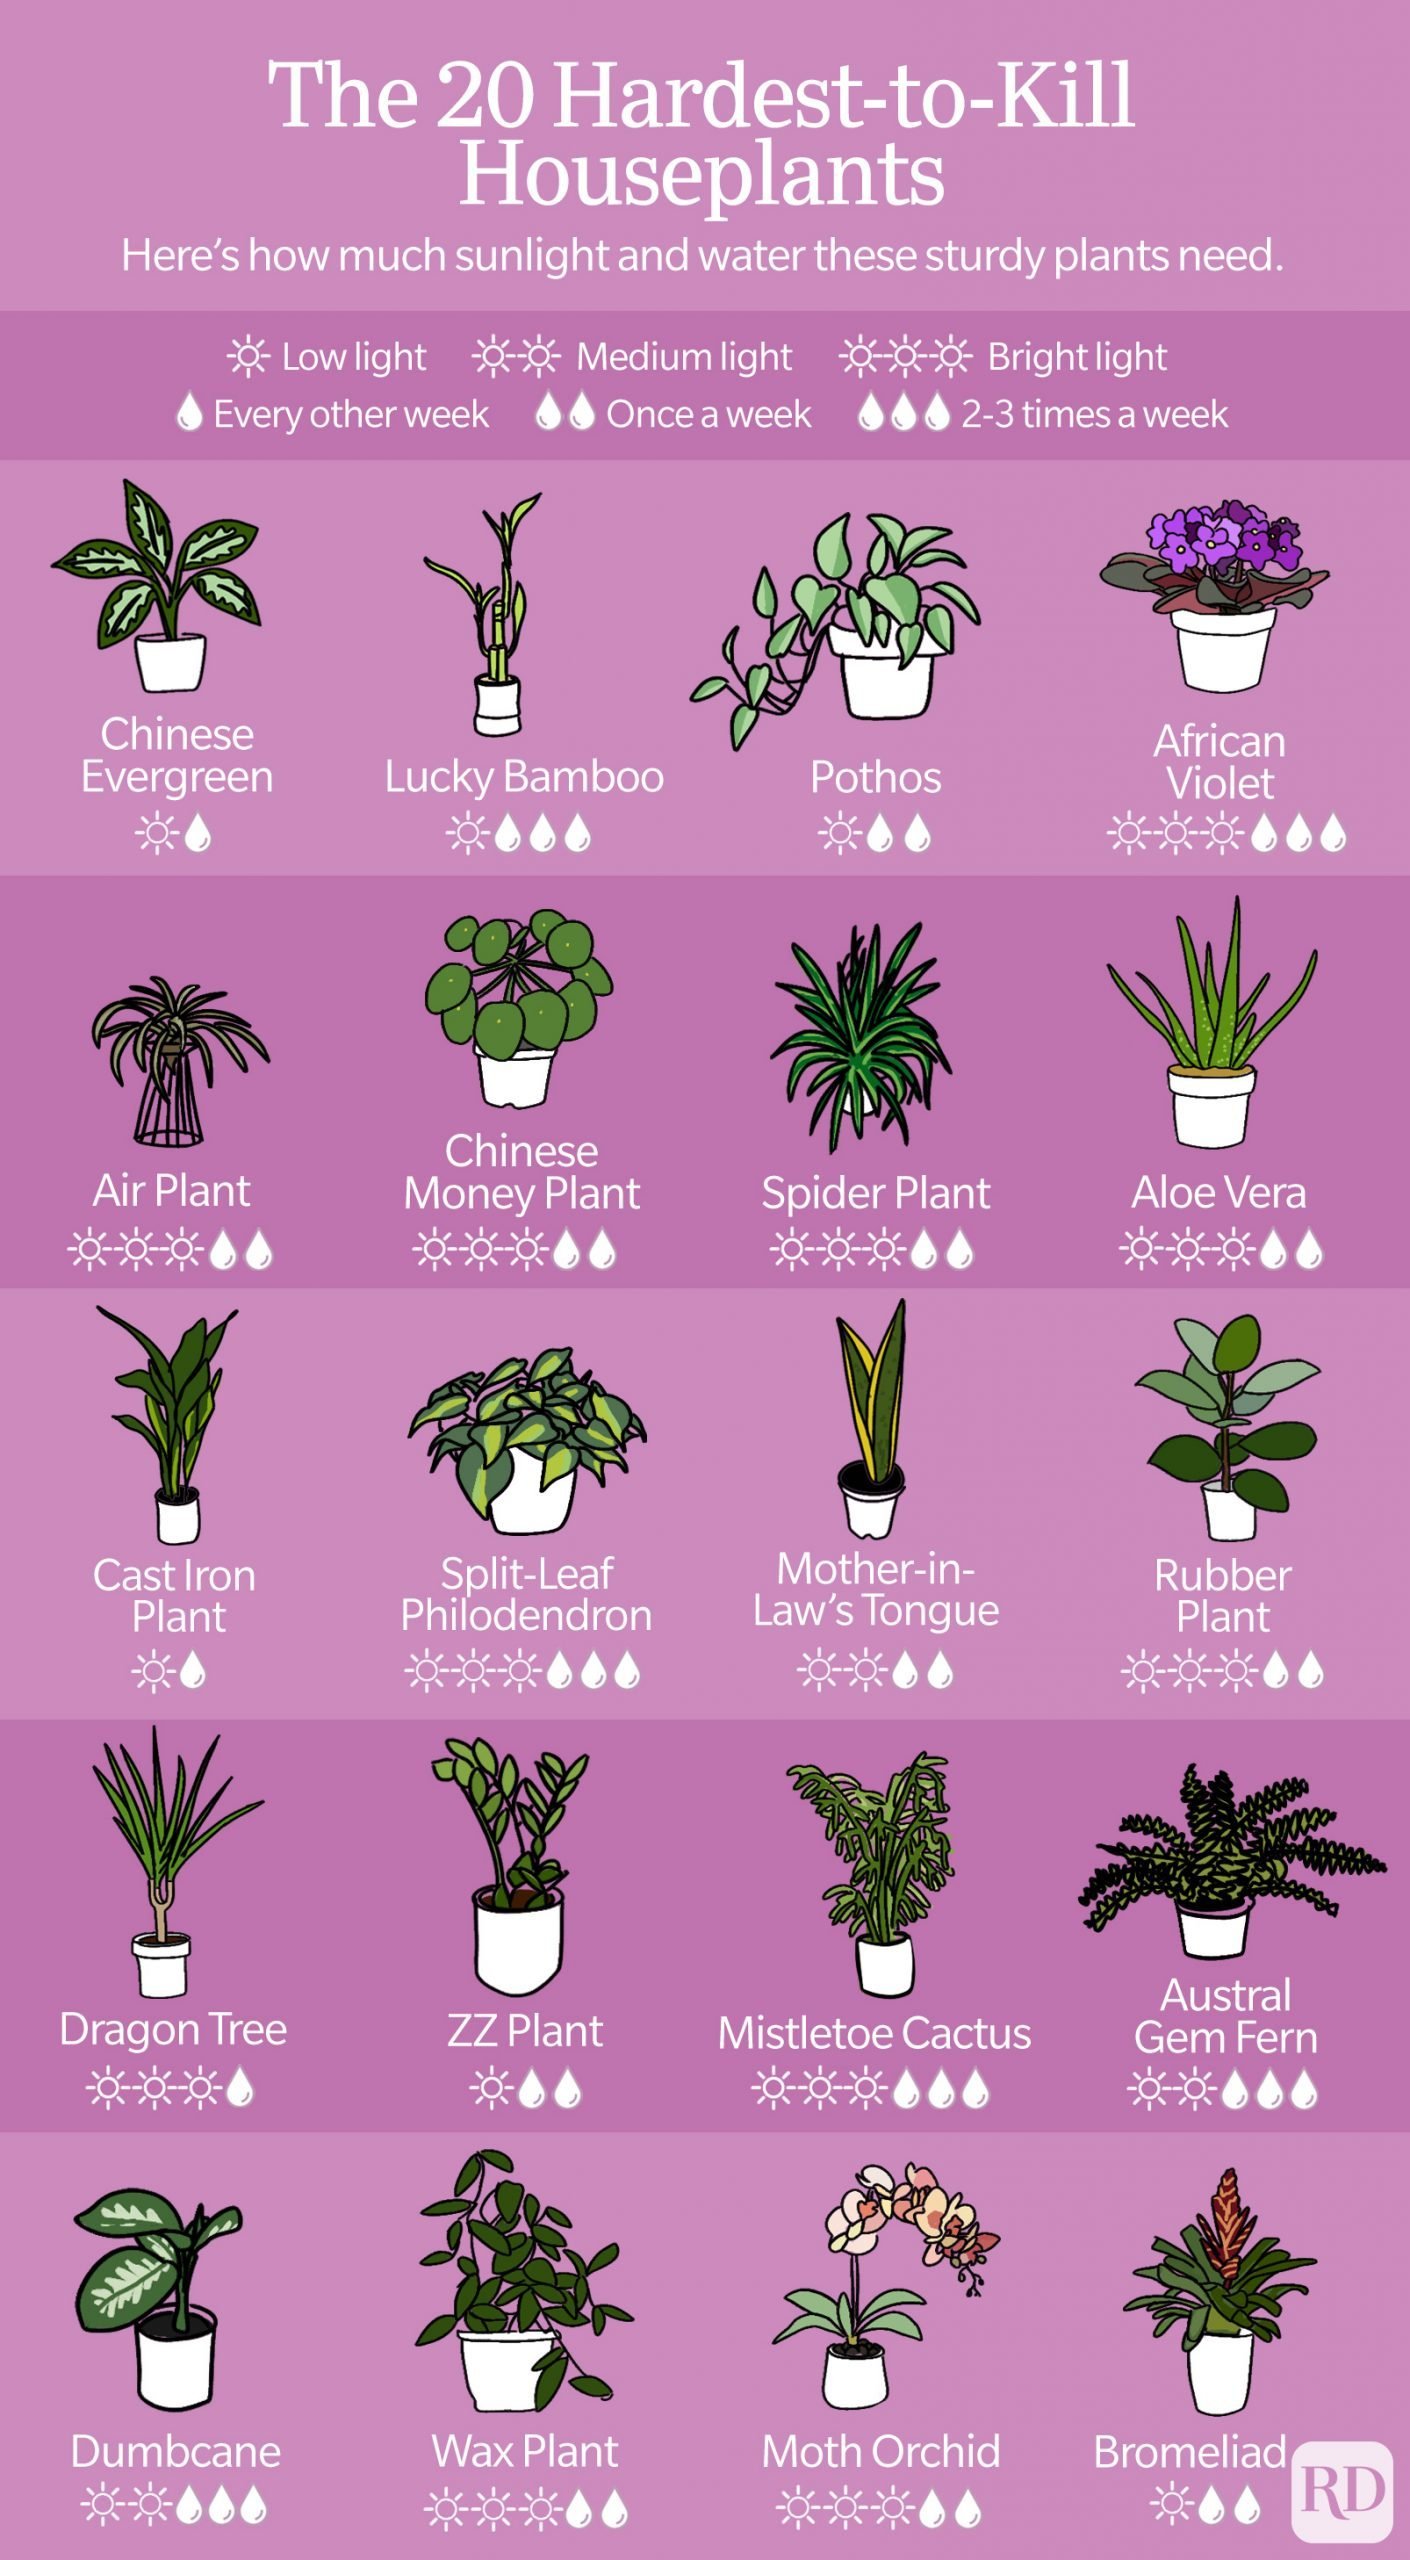 Hard to kill houseplants infographic - list of plants in article on purple